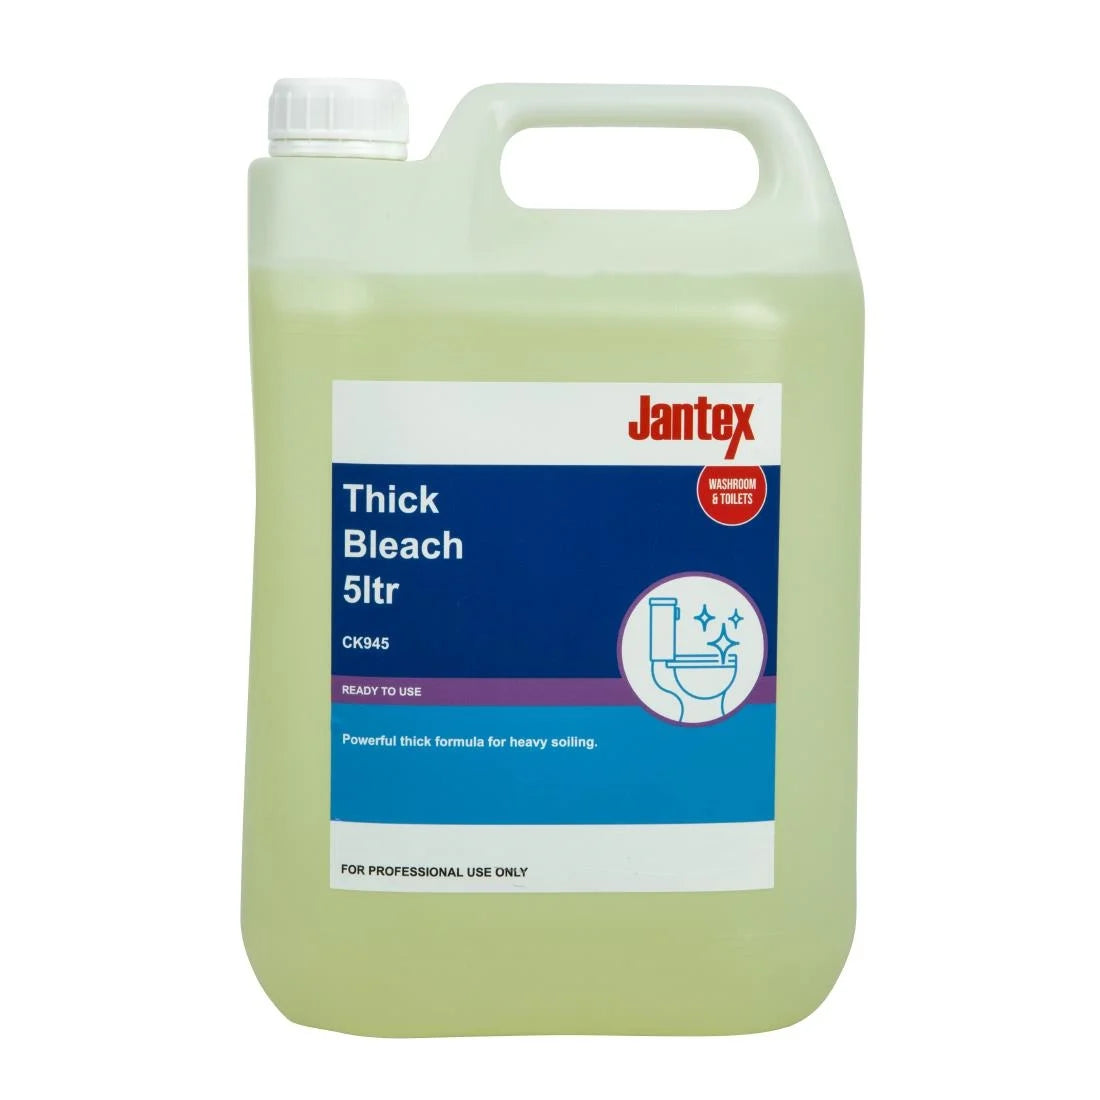 Jantex Pro Thick Bleach Concentrate 5Ltr JD Catering Equipment Solutions Ltd